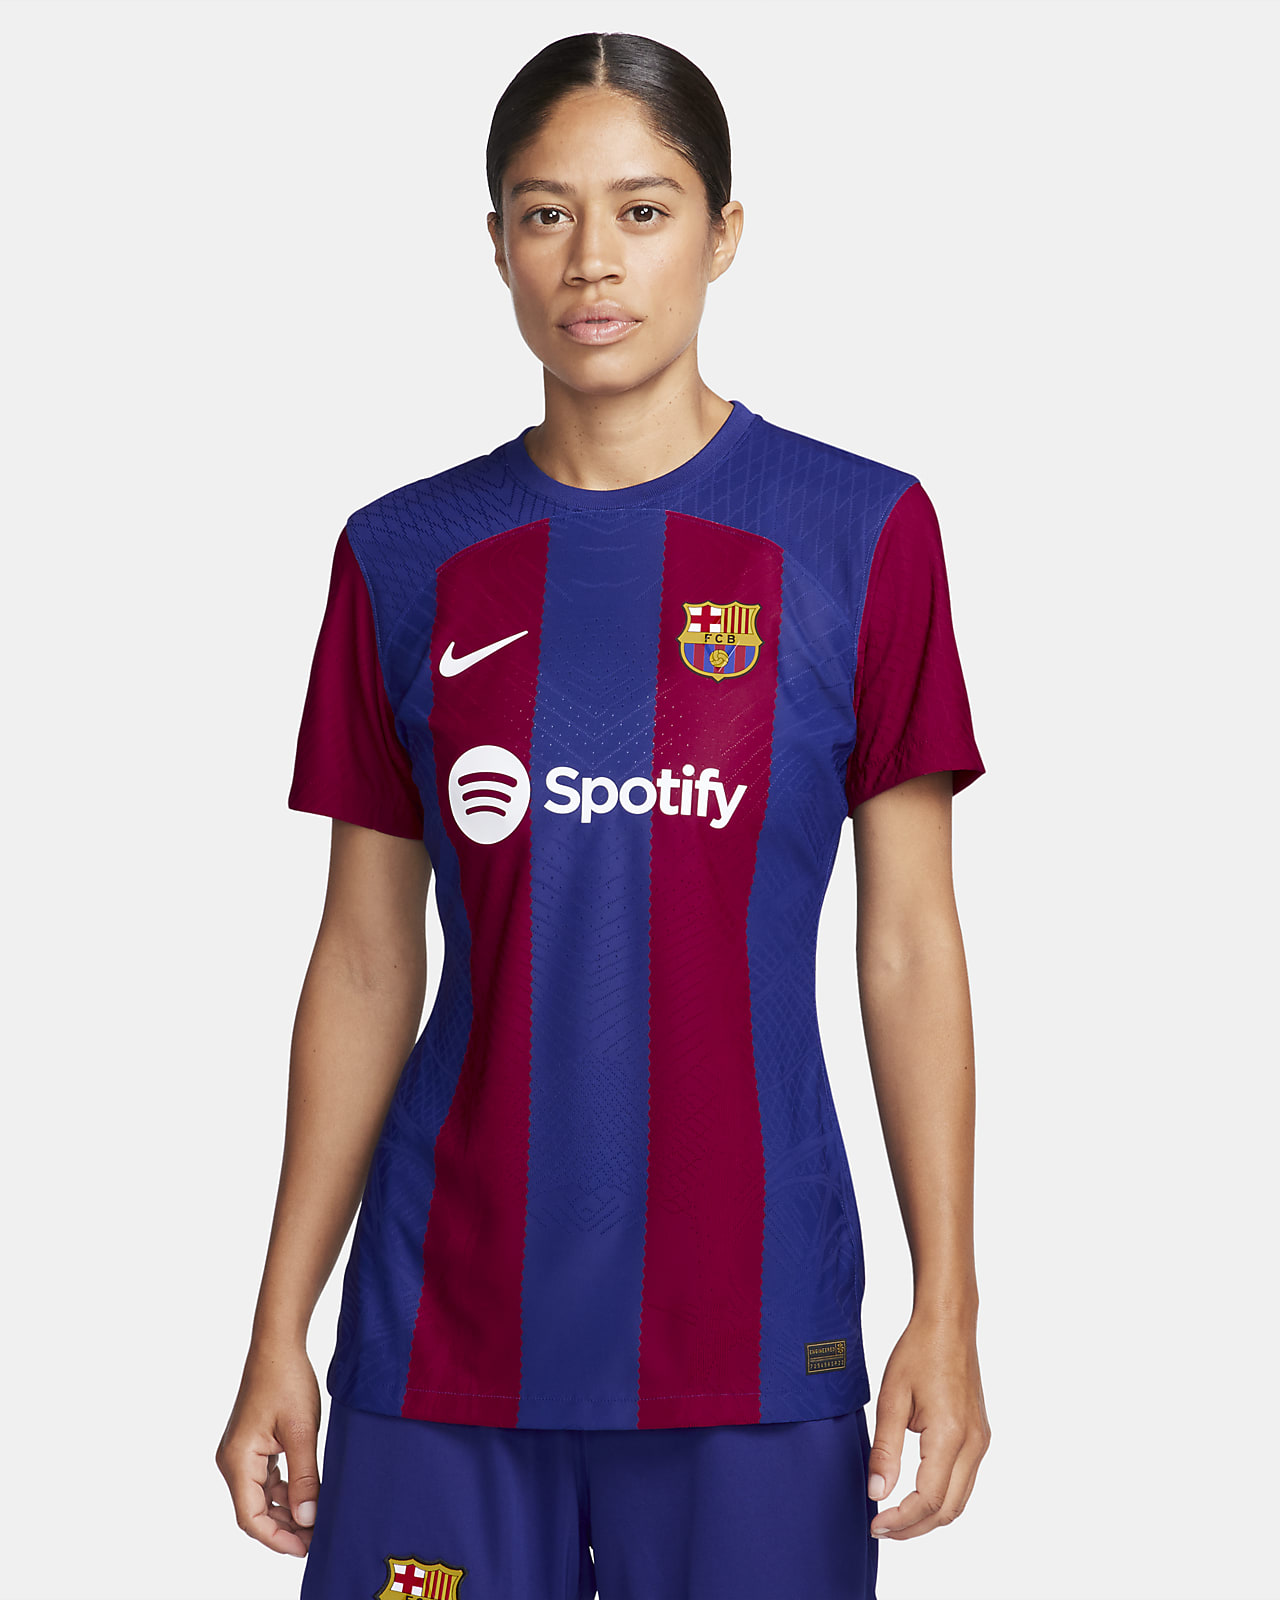 FC Barcelona 2023/24 Match Thuis Nike Dri-FIT ADV voetbalshirt voor dames